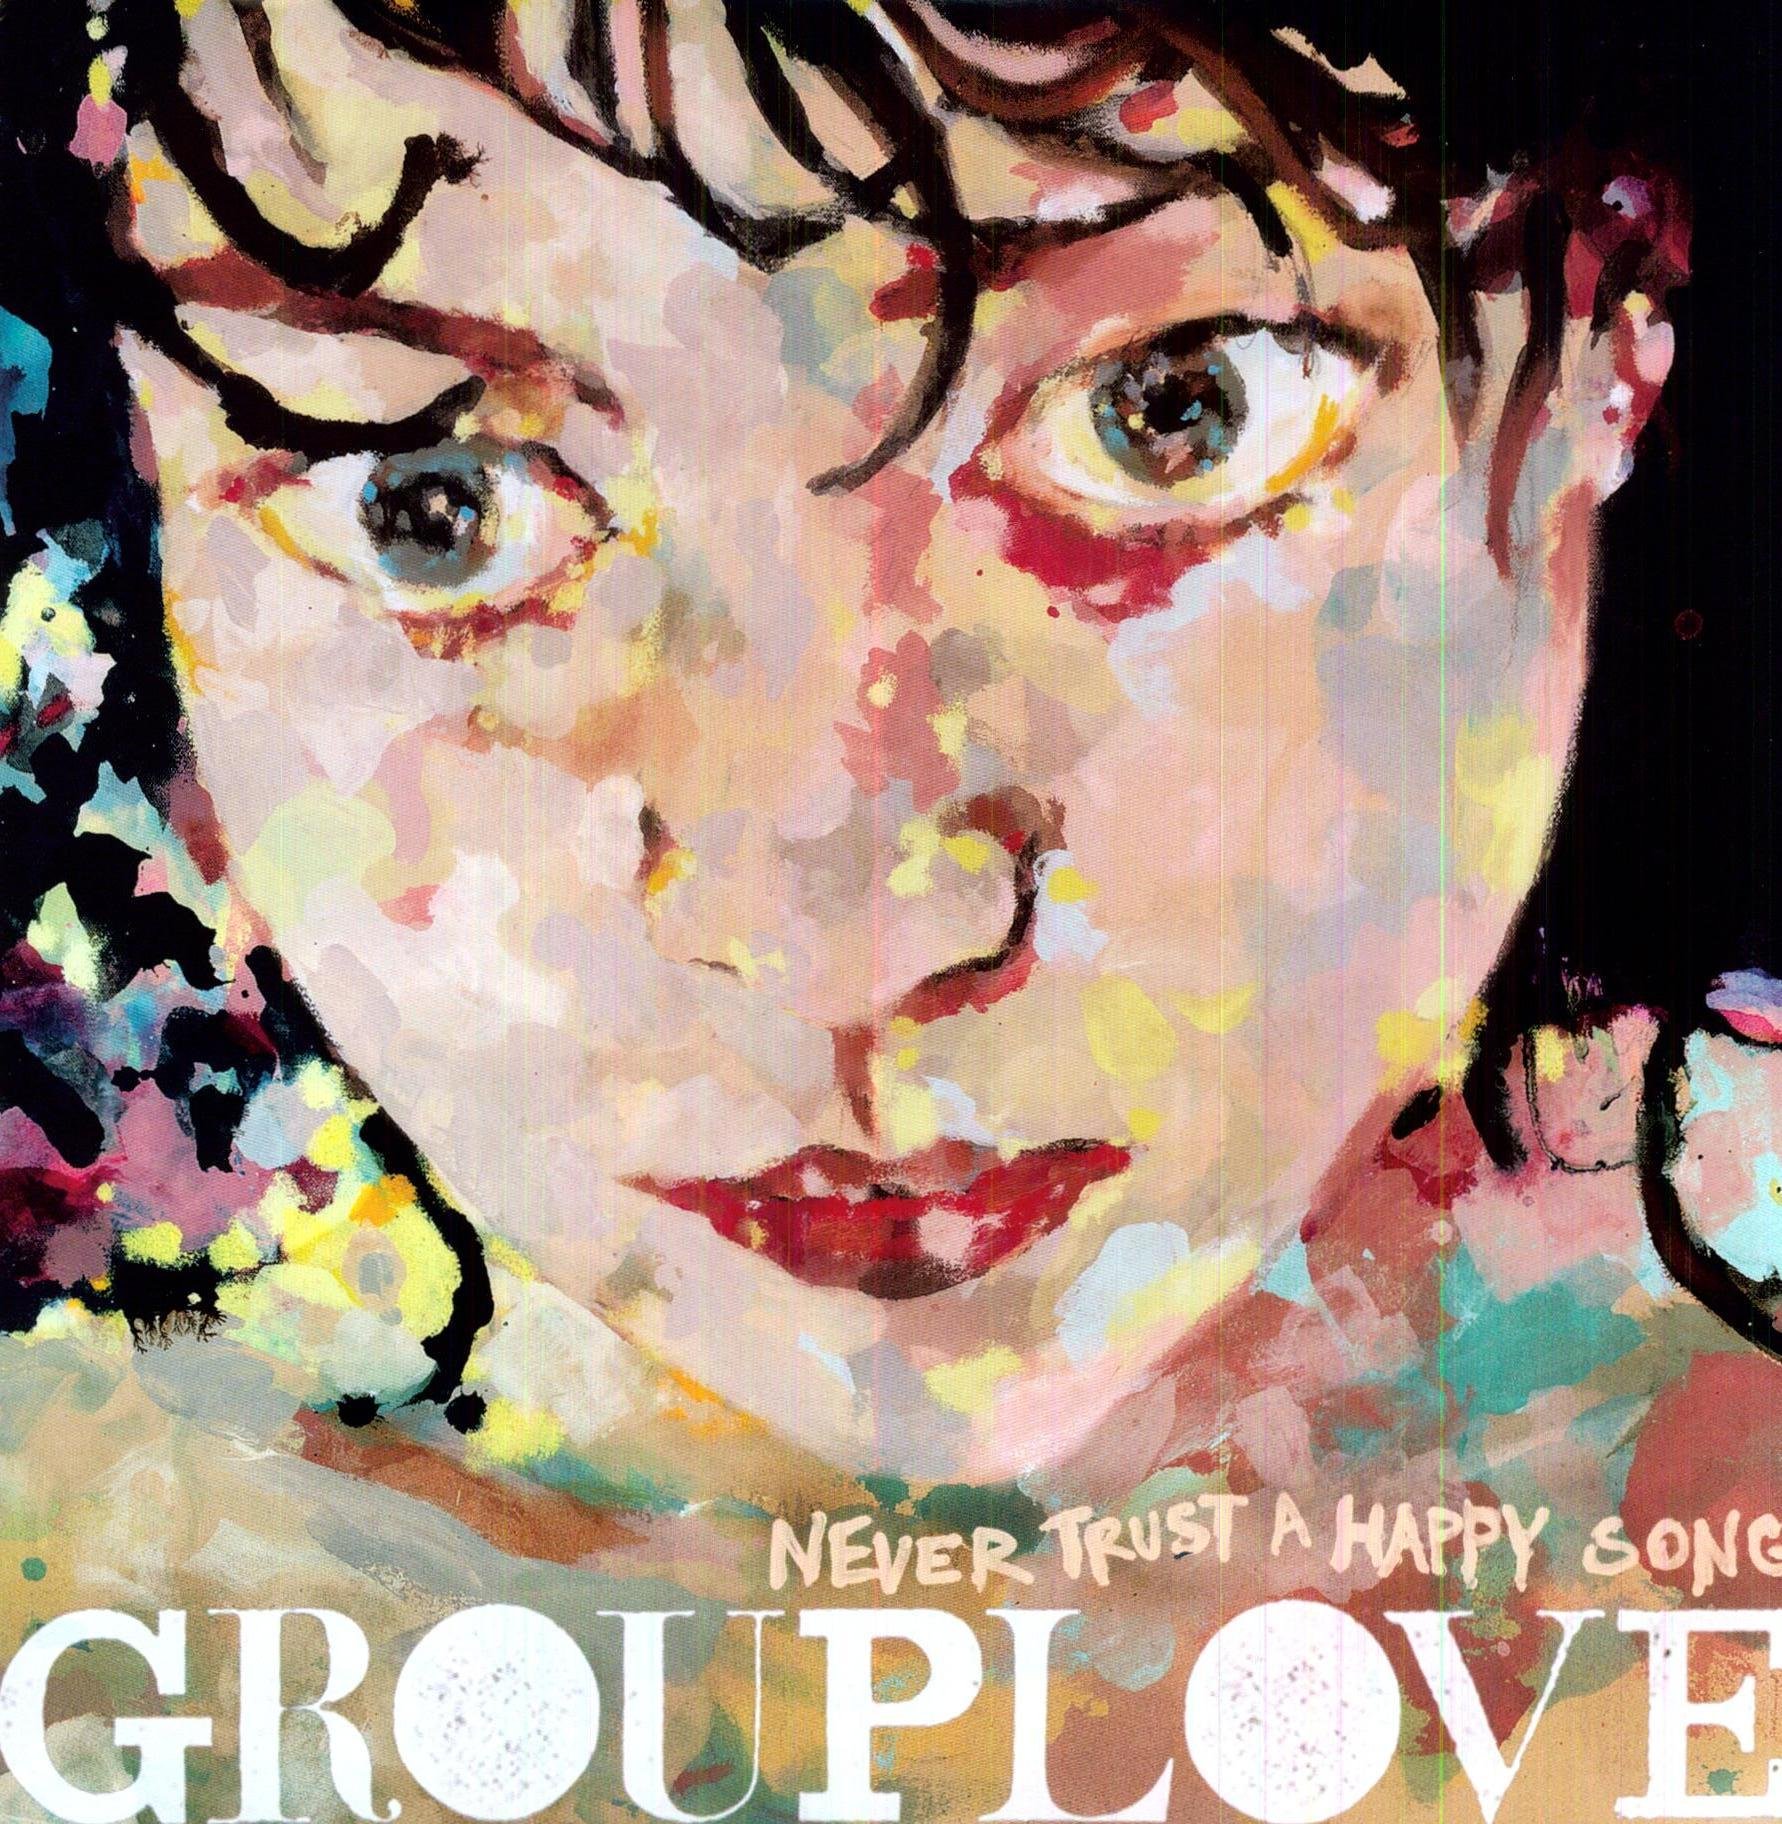 Grouplove - Tongue Tied - Listen and discover 